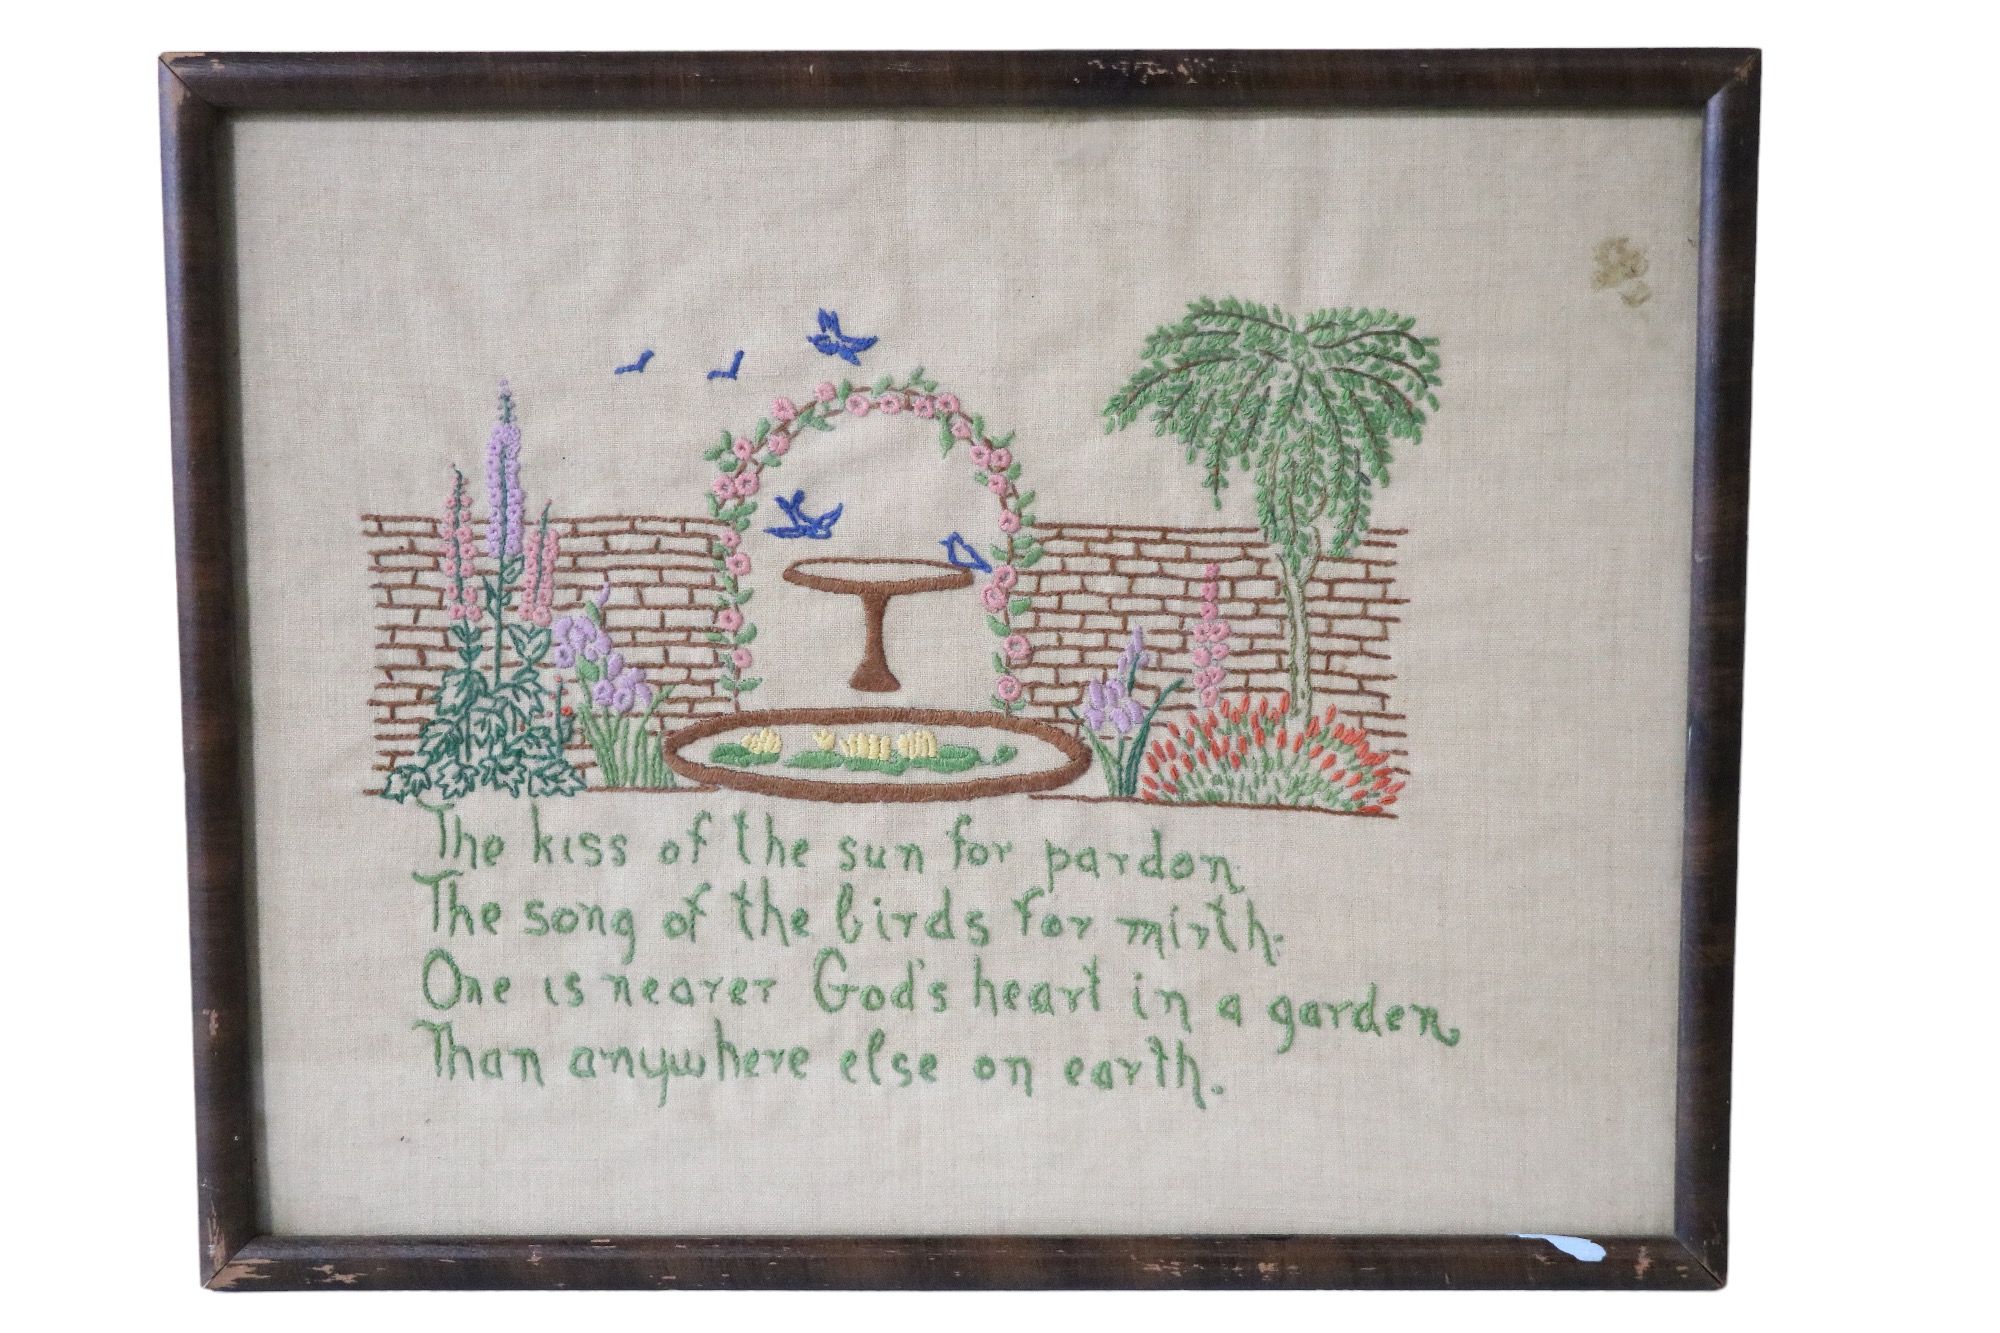 A religious text embroidered in depiction of a walled garden with a lily covered pond and birds